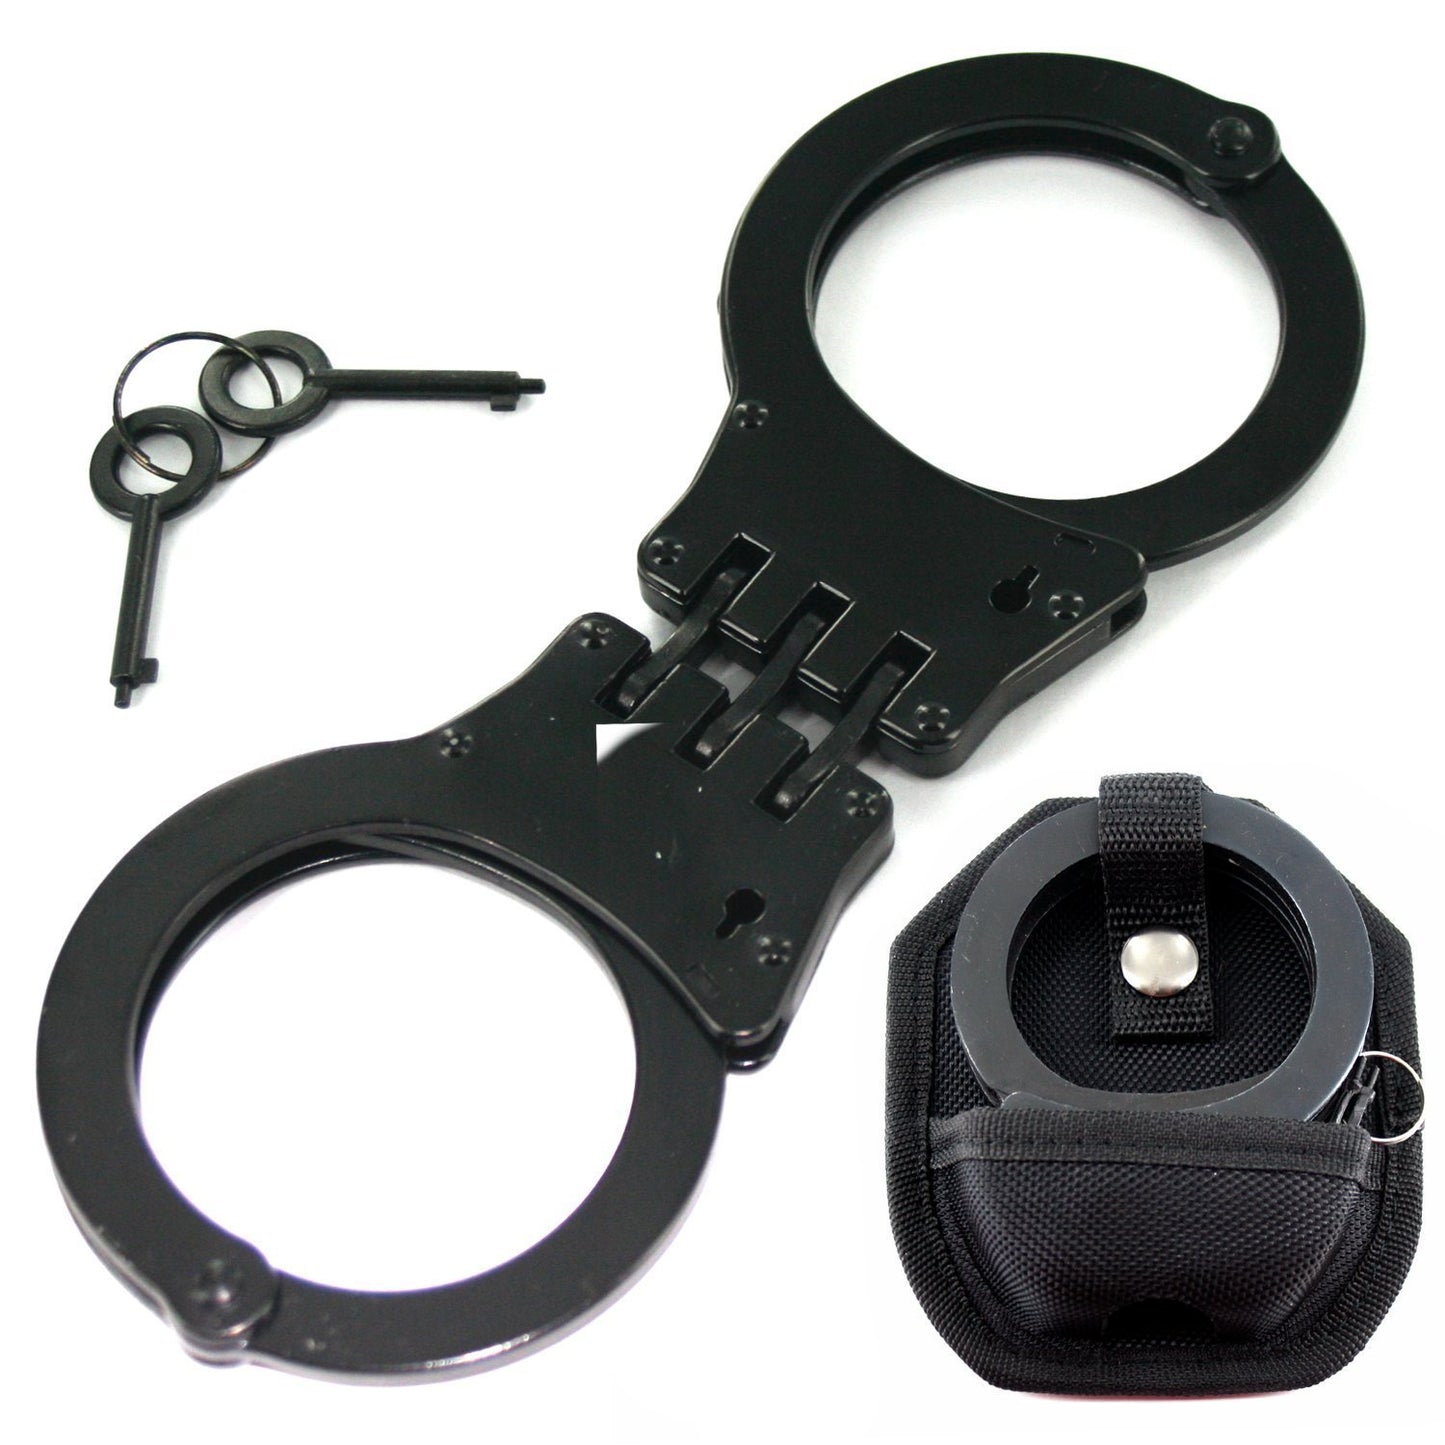 Professional Heavy Duty Black Hinged Police Style Handcuffs Double Lock with Duty Handcuff Nylon Case Holster